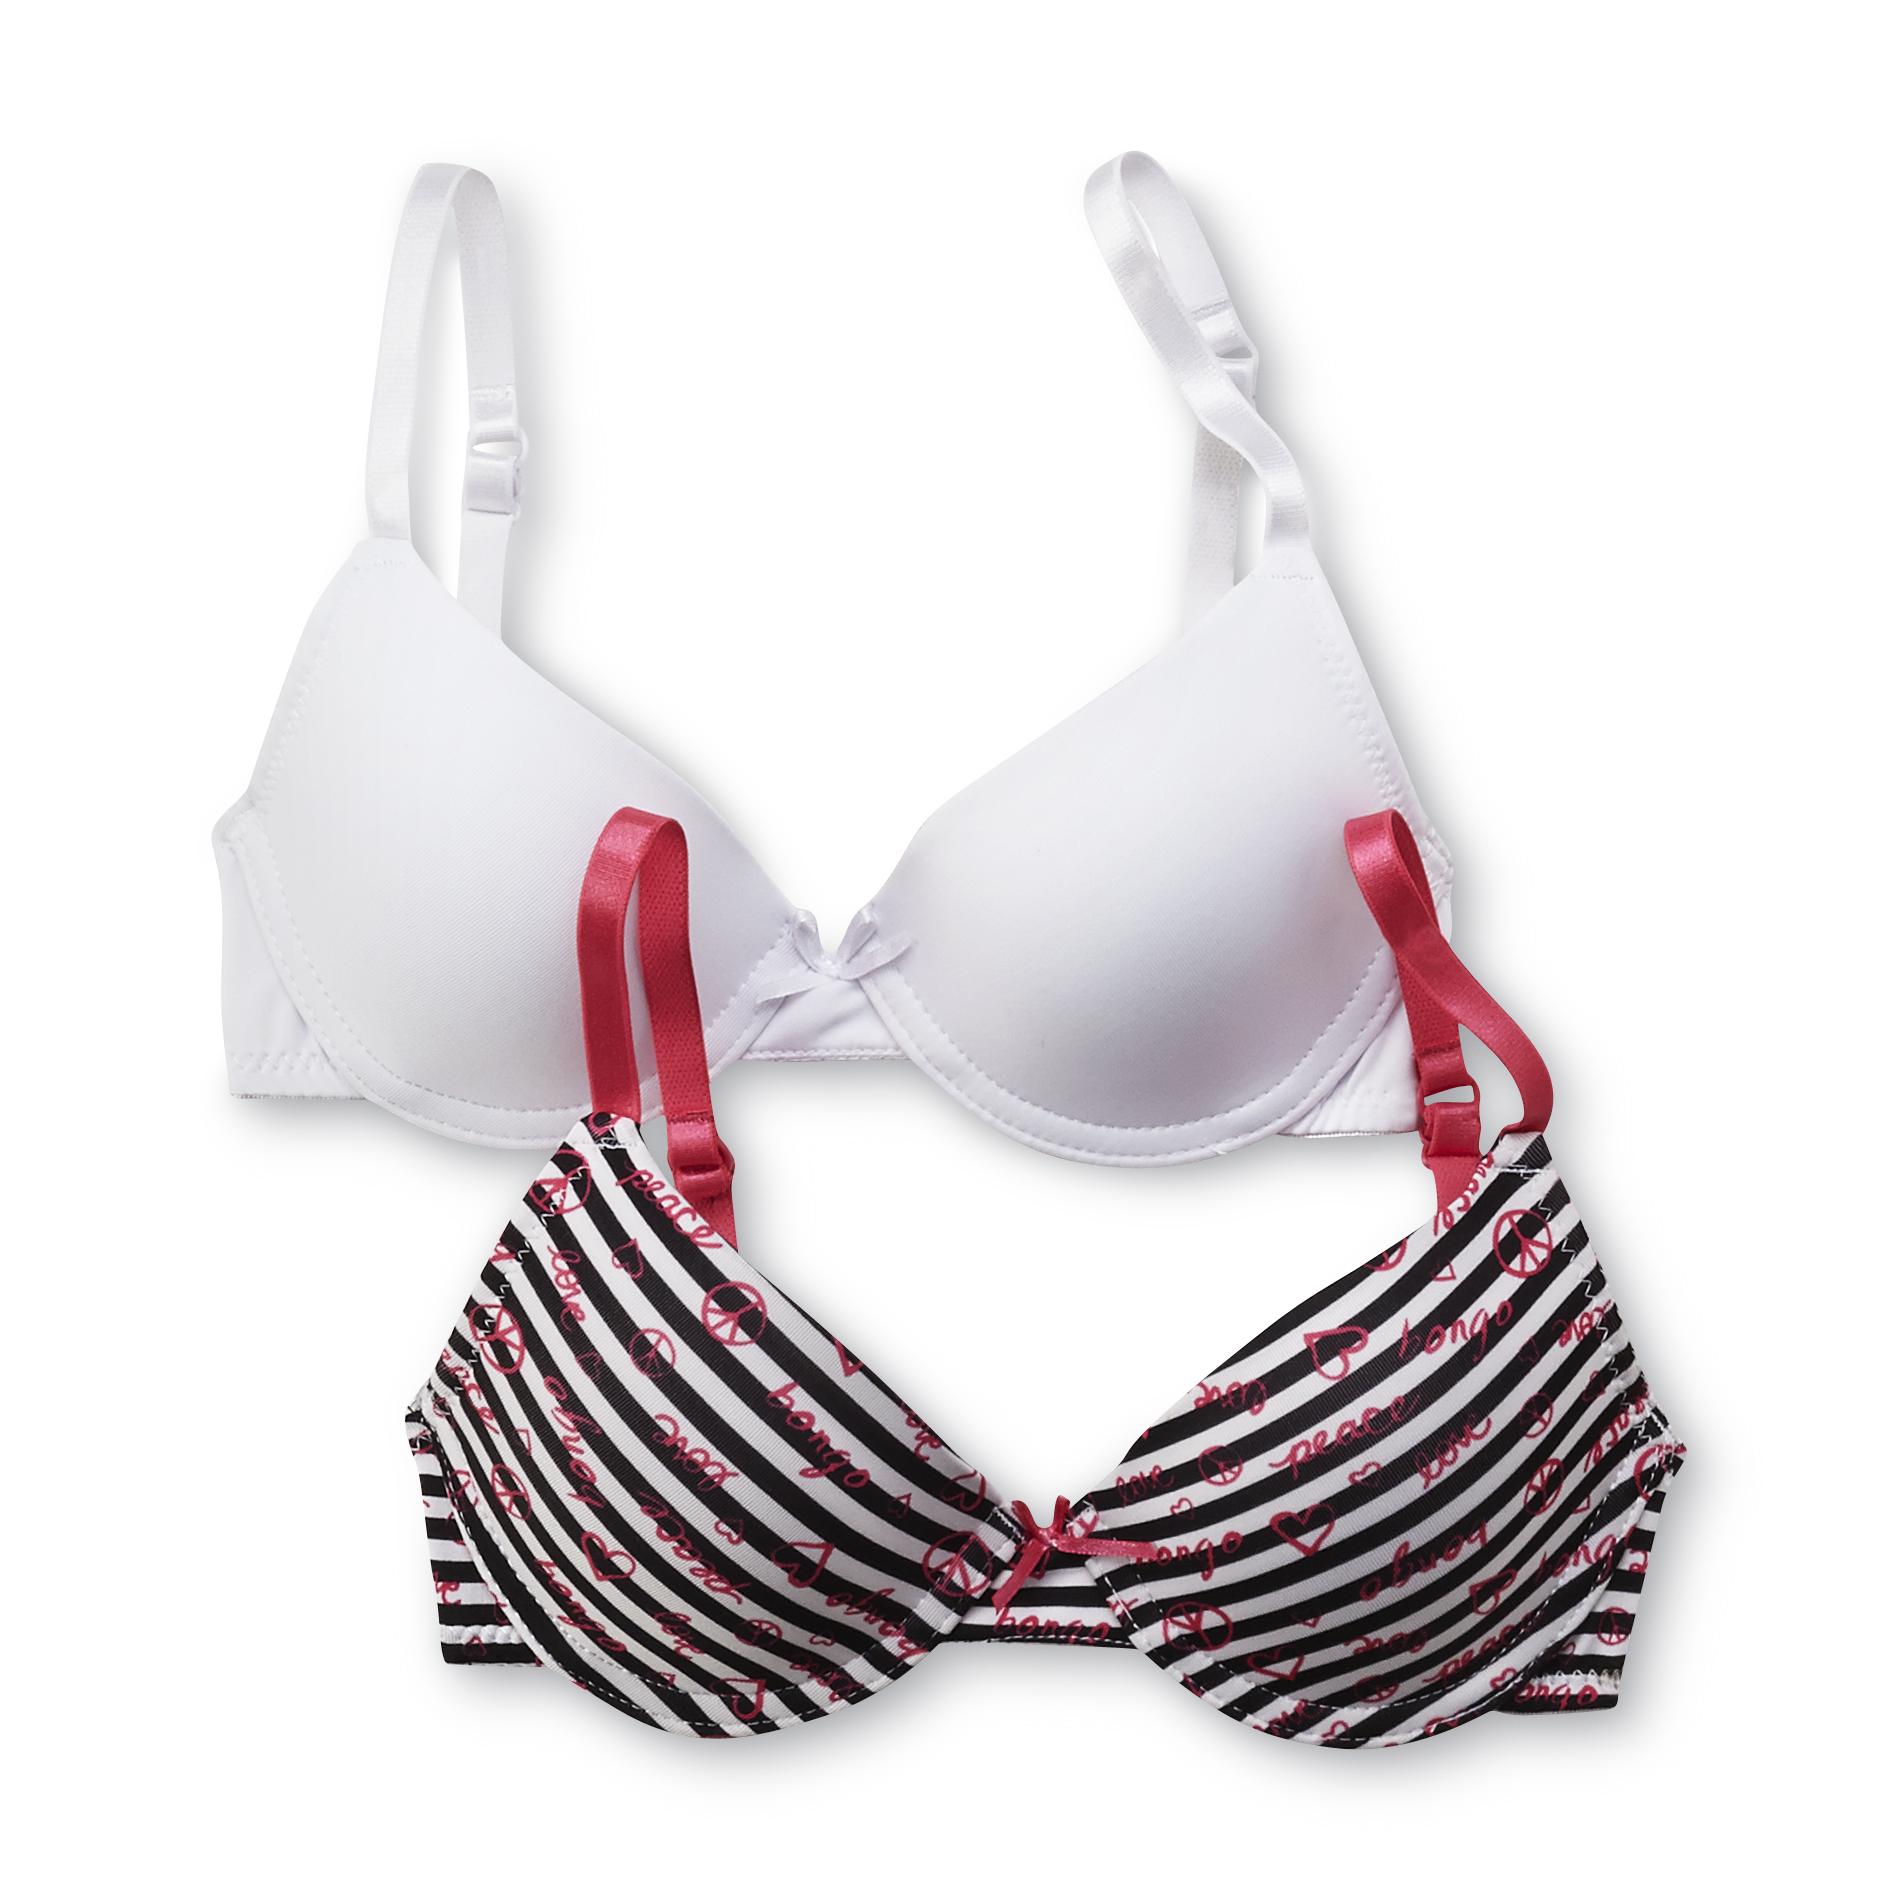 Bongo Girl's 2-Pack Soft Cup Bras - Striped